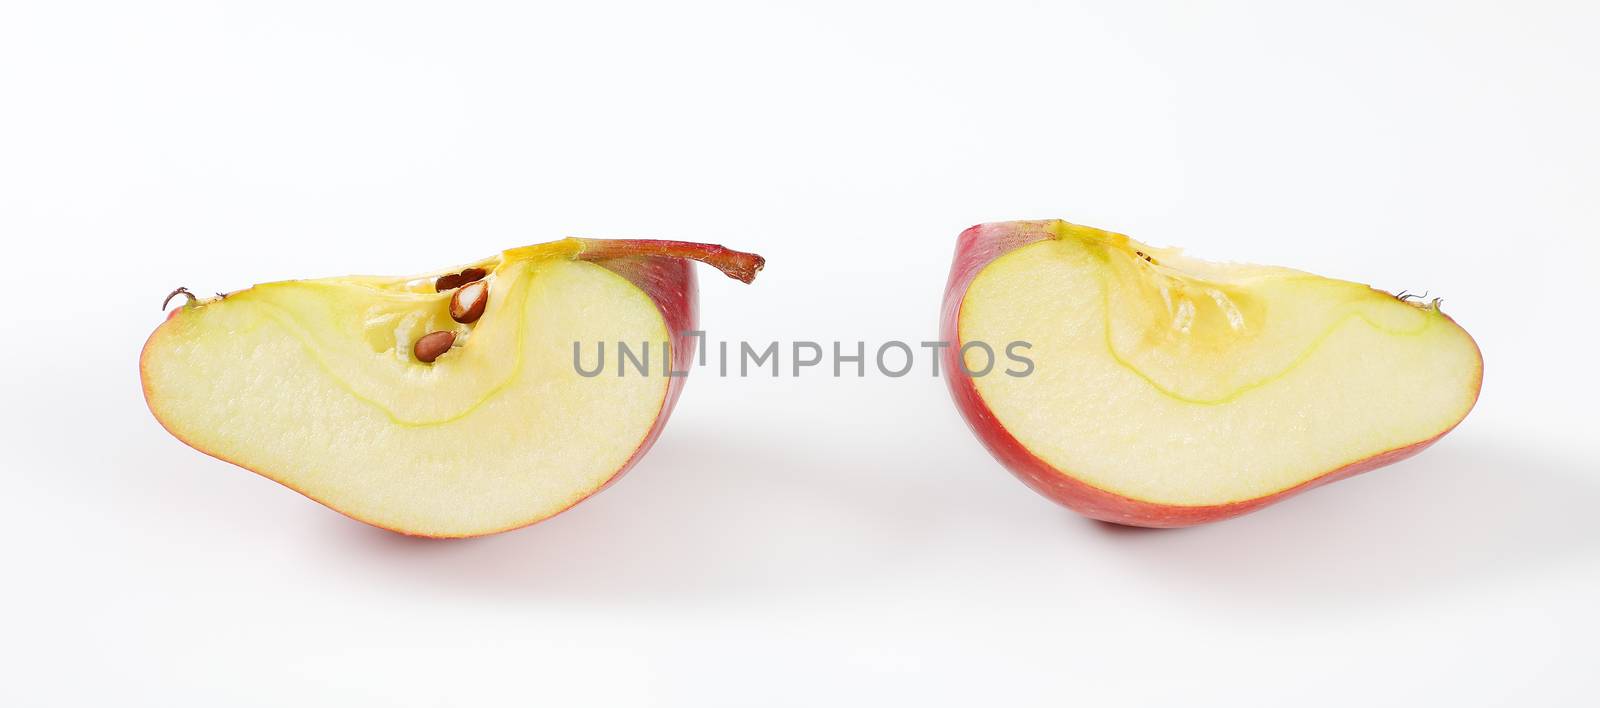 red apple wedges on white background